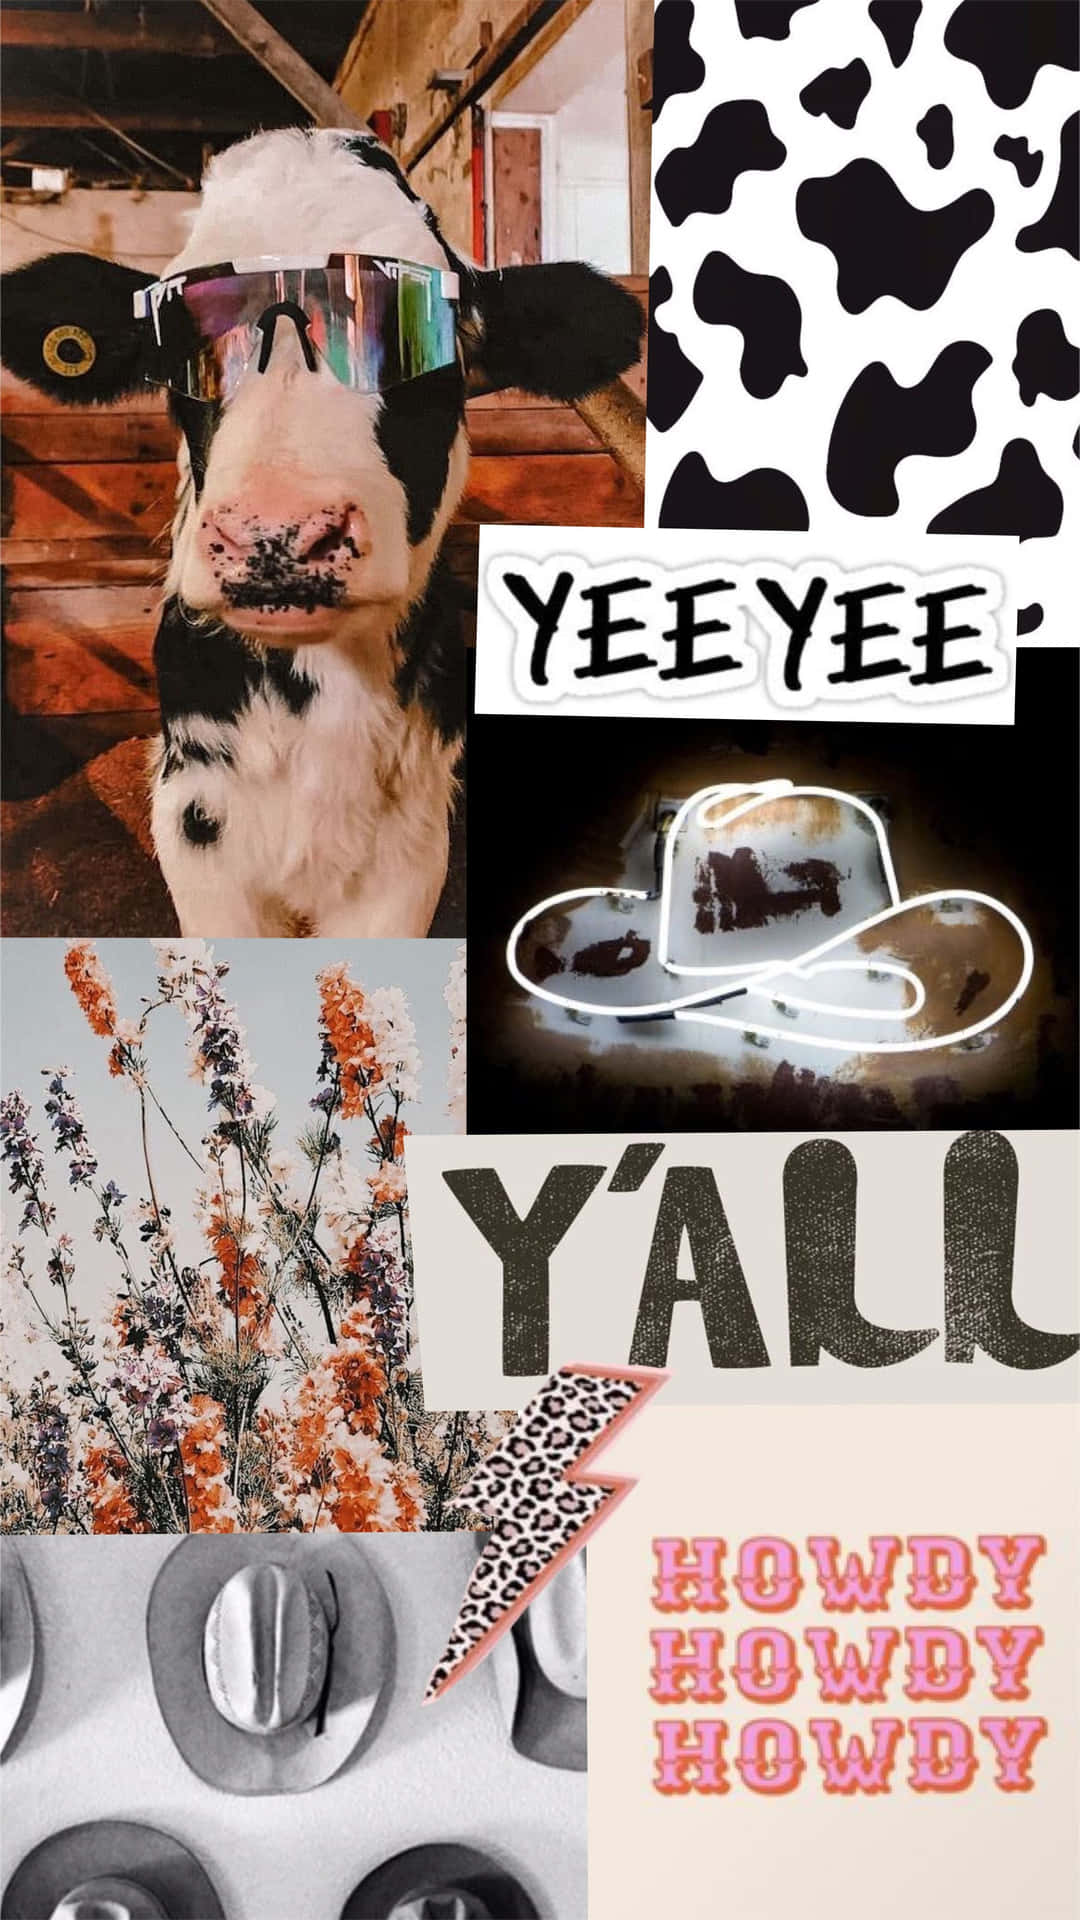 A Collage Of Cows, Cowboys, And Cows Wallpaper